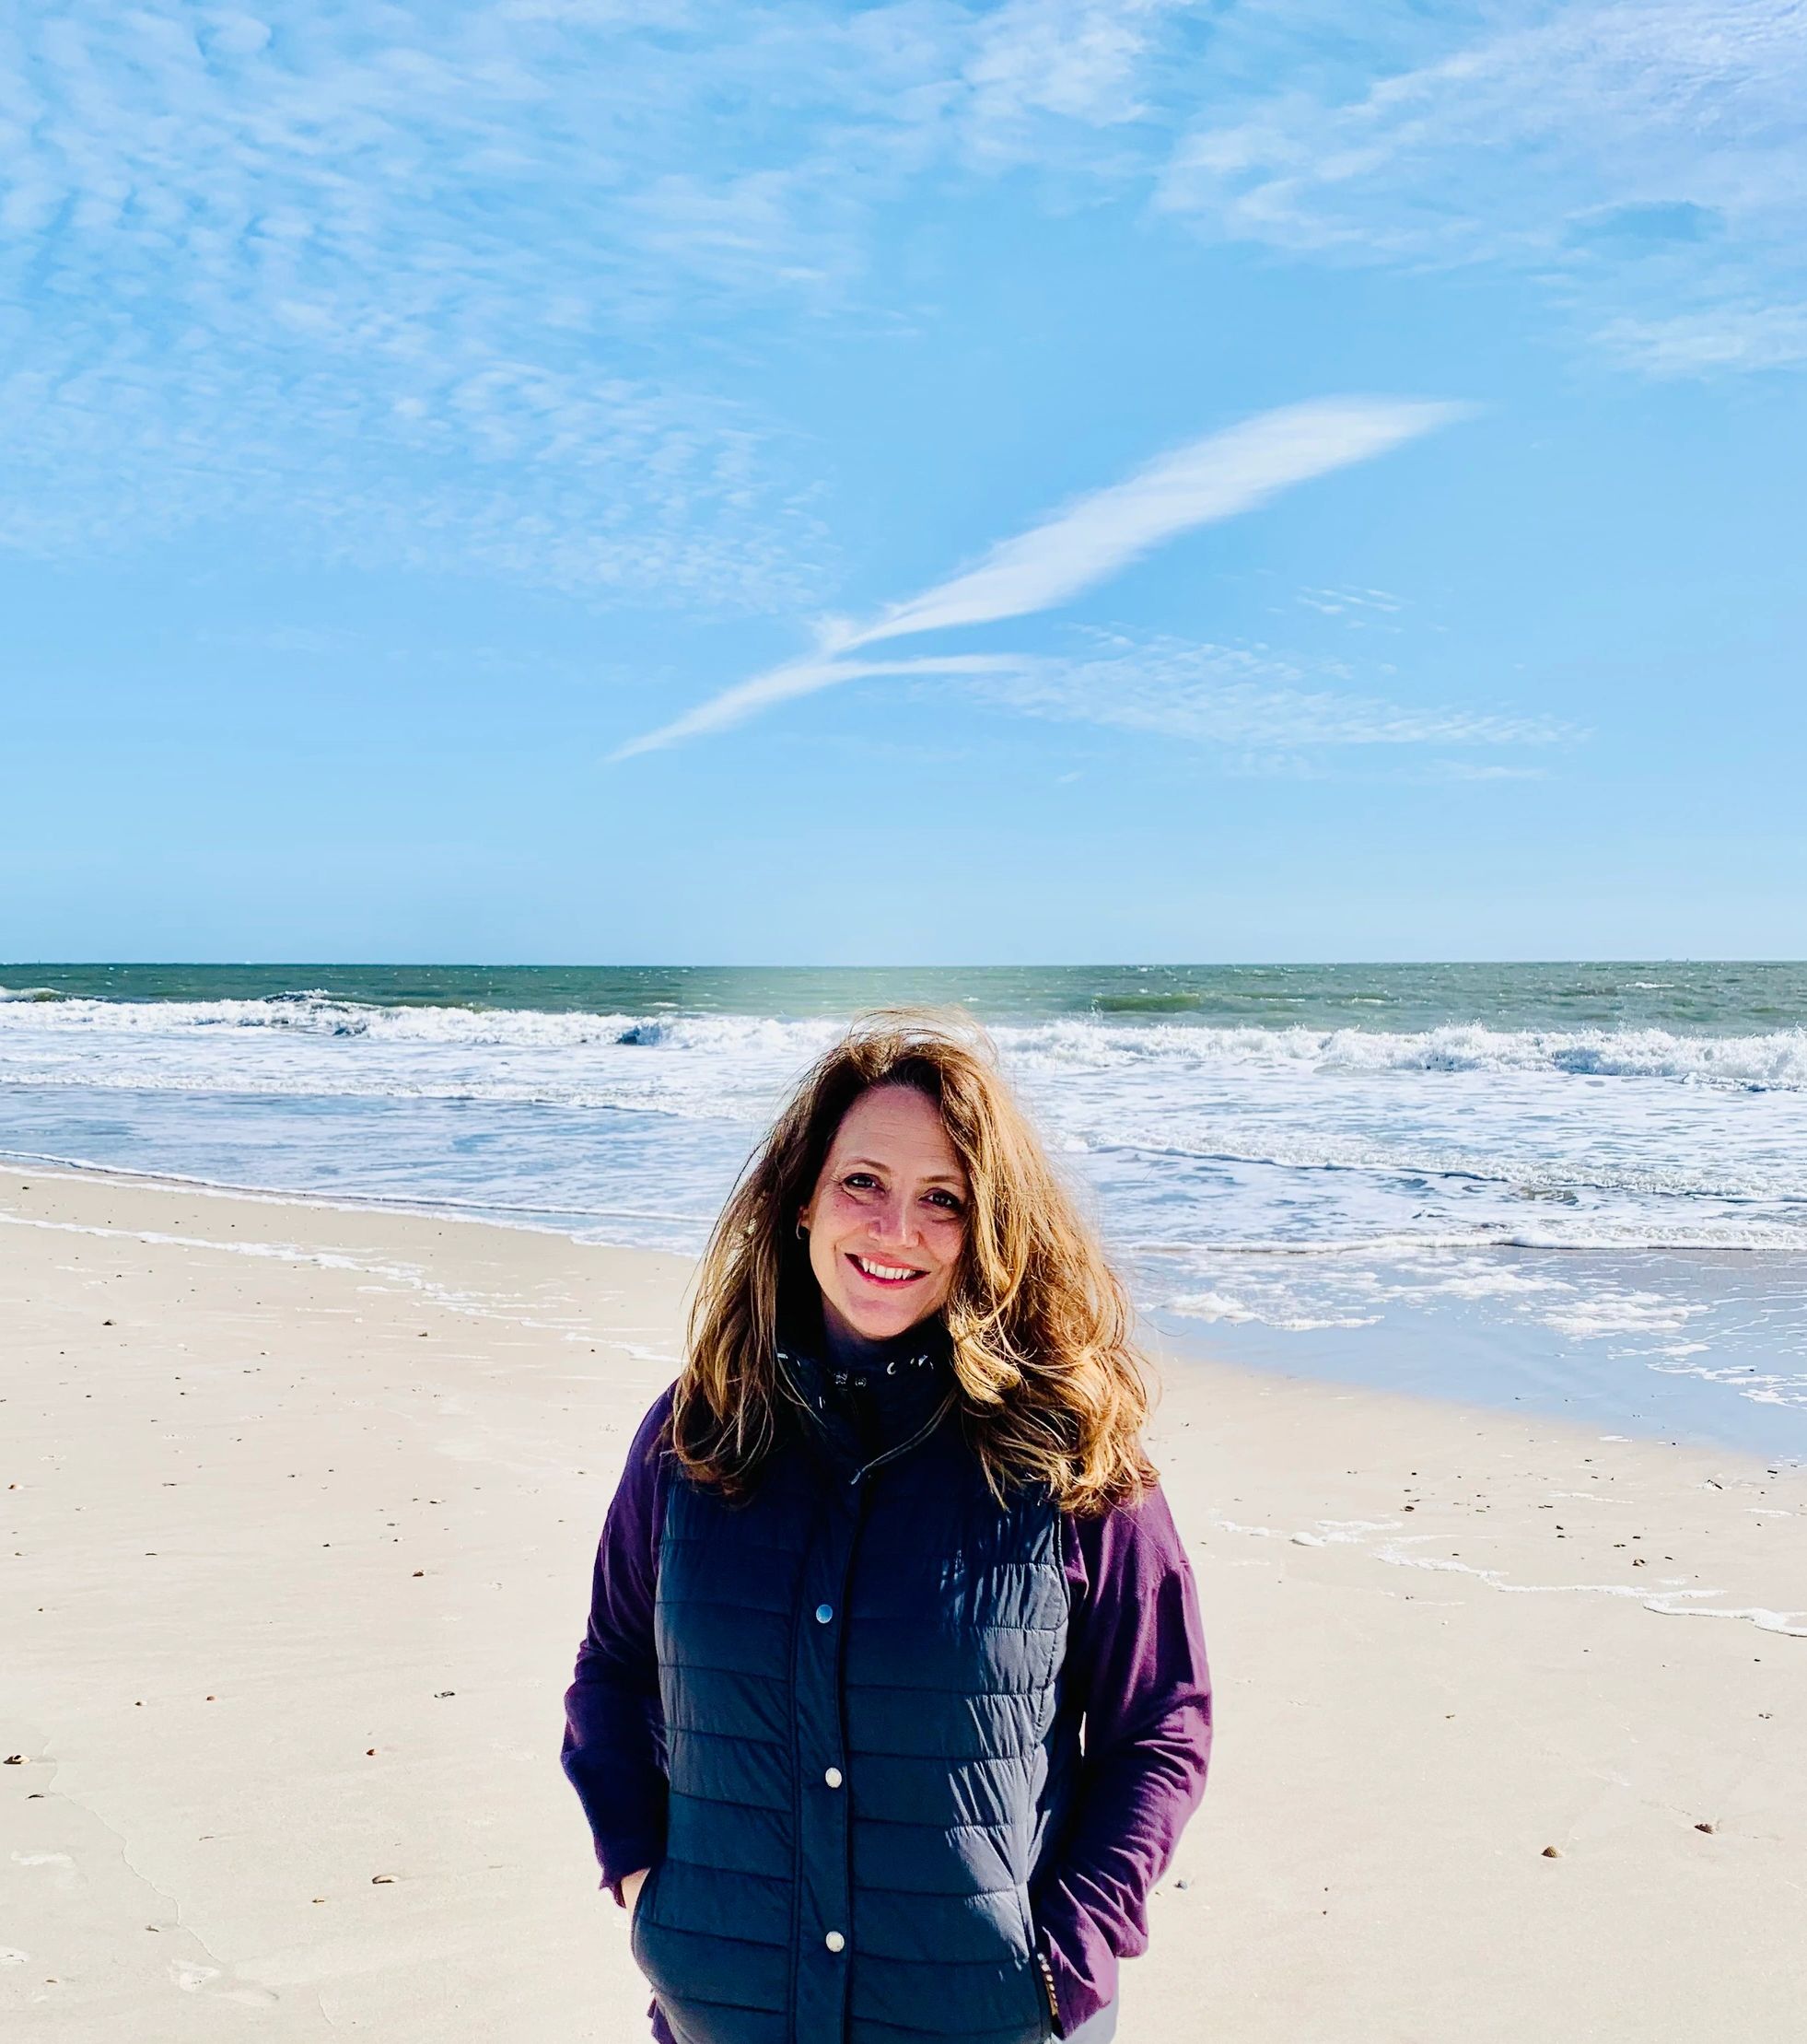 A person wearing a jacket and standing near the beach